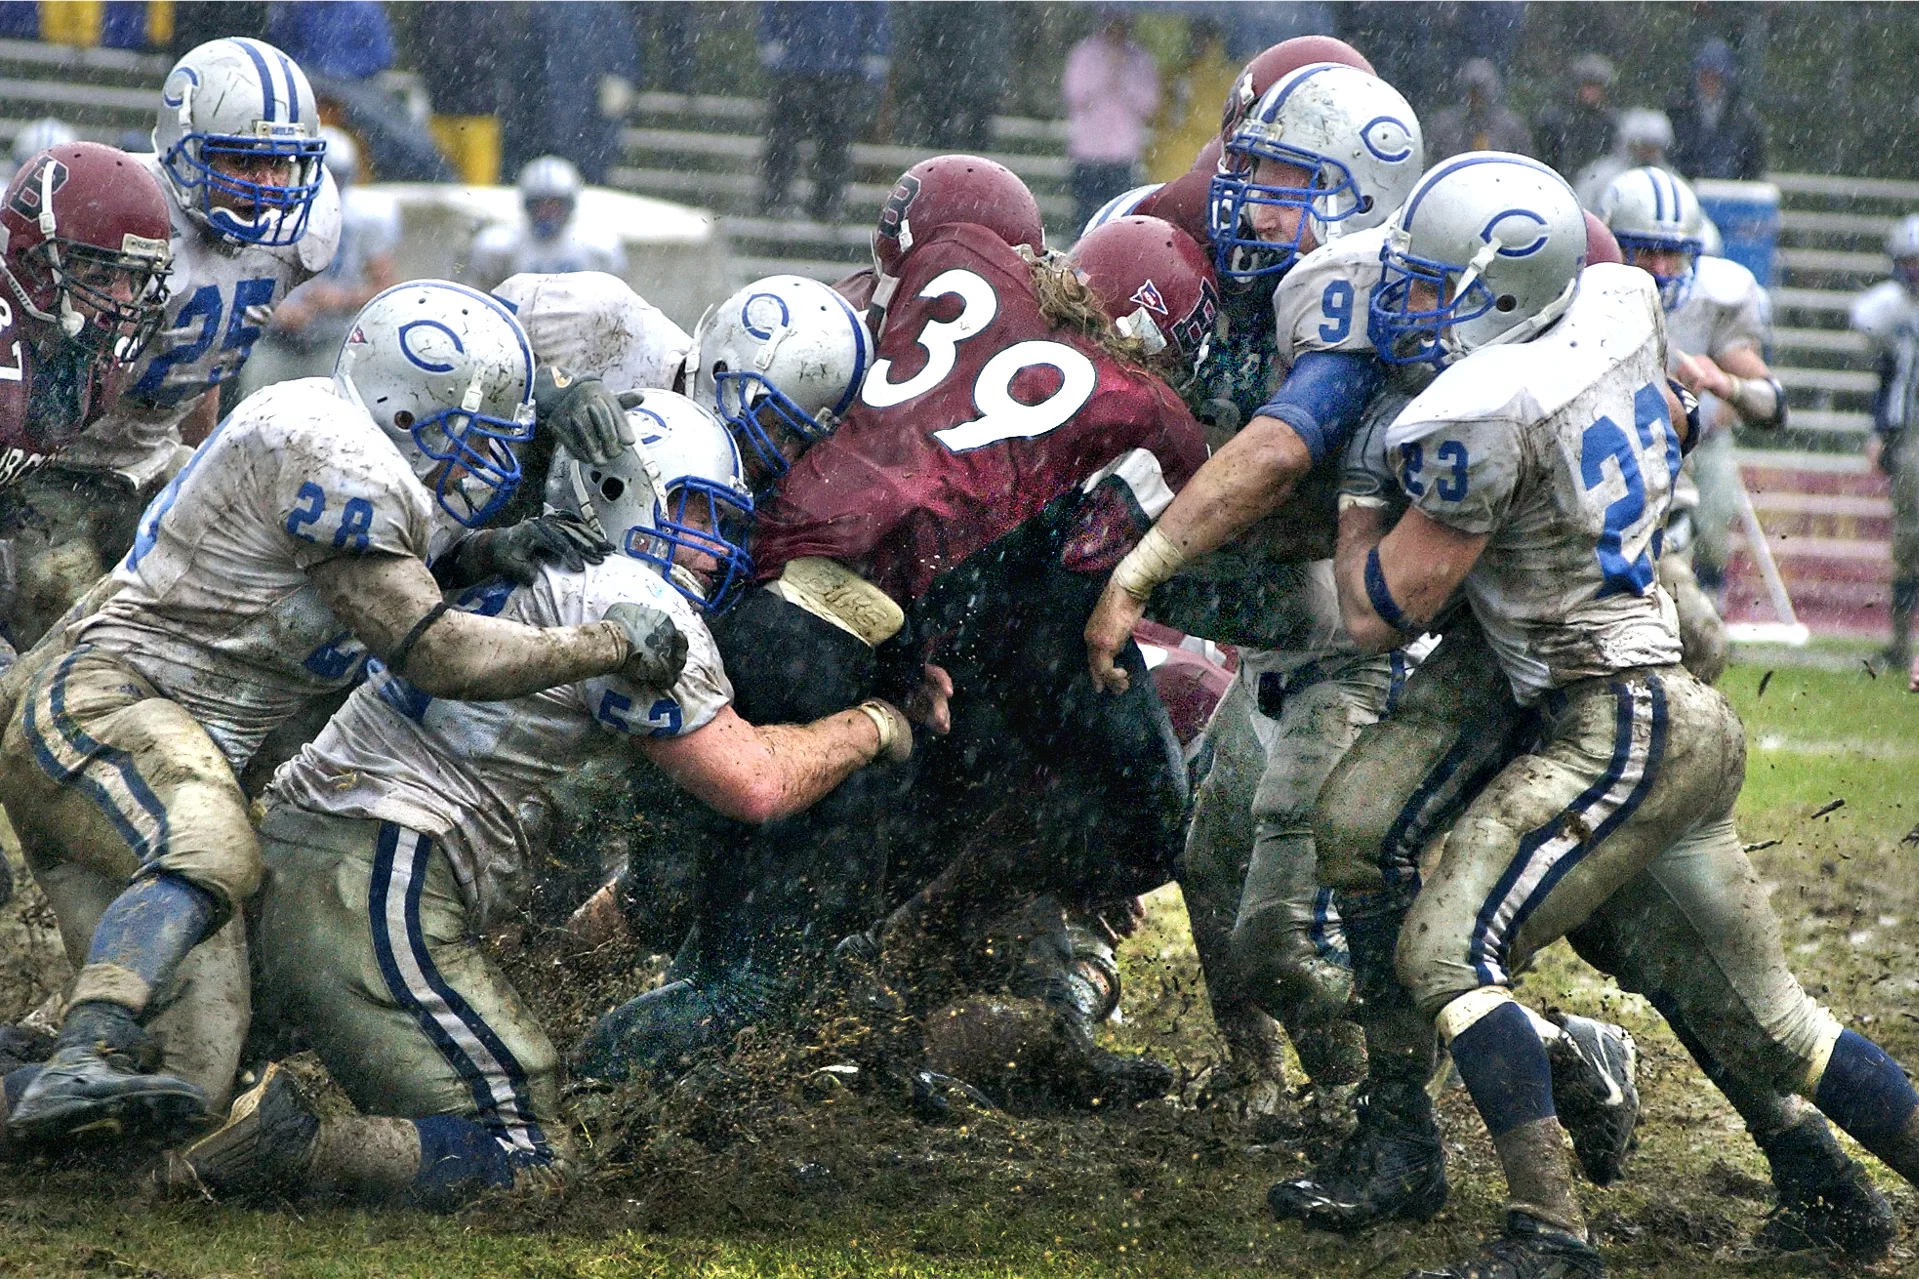 Four years before the advent of artifical turf on Garcelon Field, this image of Jamie Walker ’07 of Needham, Mass., moving a pile of Colby defenders during a game in October 2006 later appeared in Sports Illustrated. (Daryn Slover for Bates College)